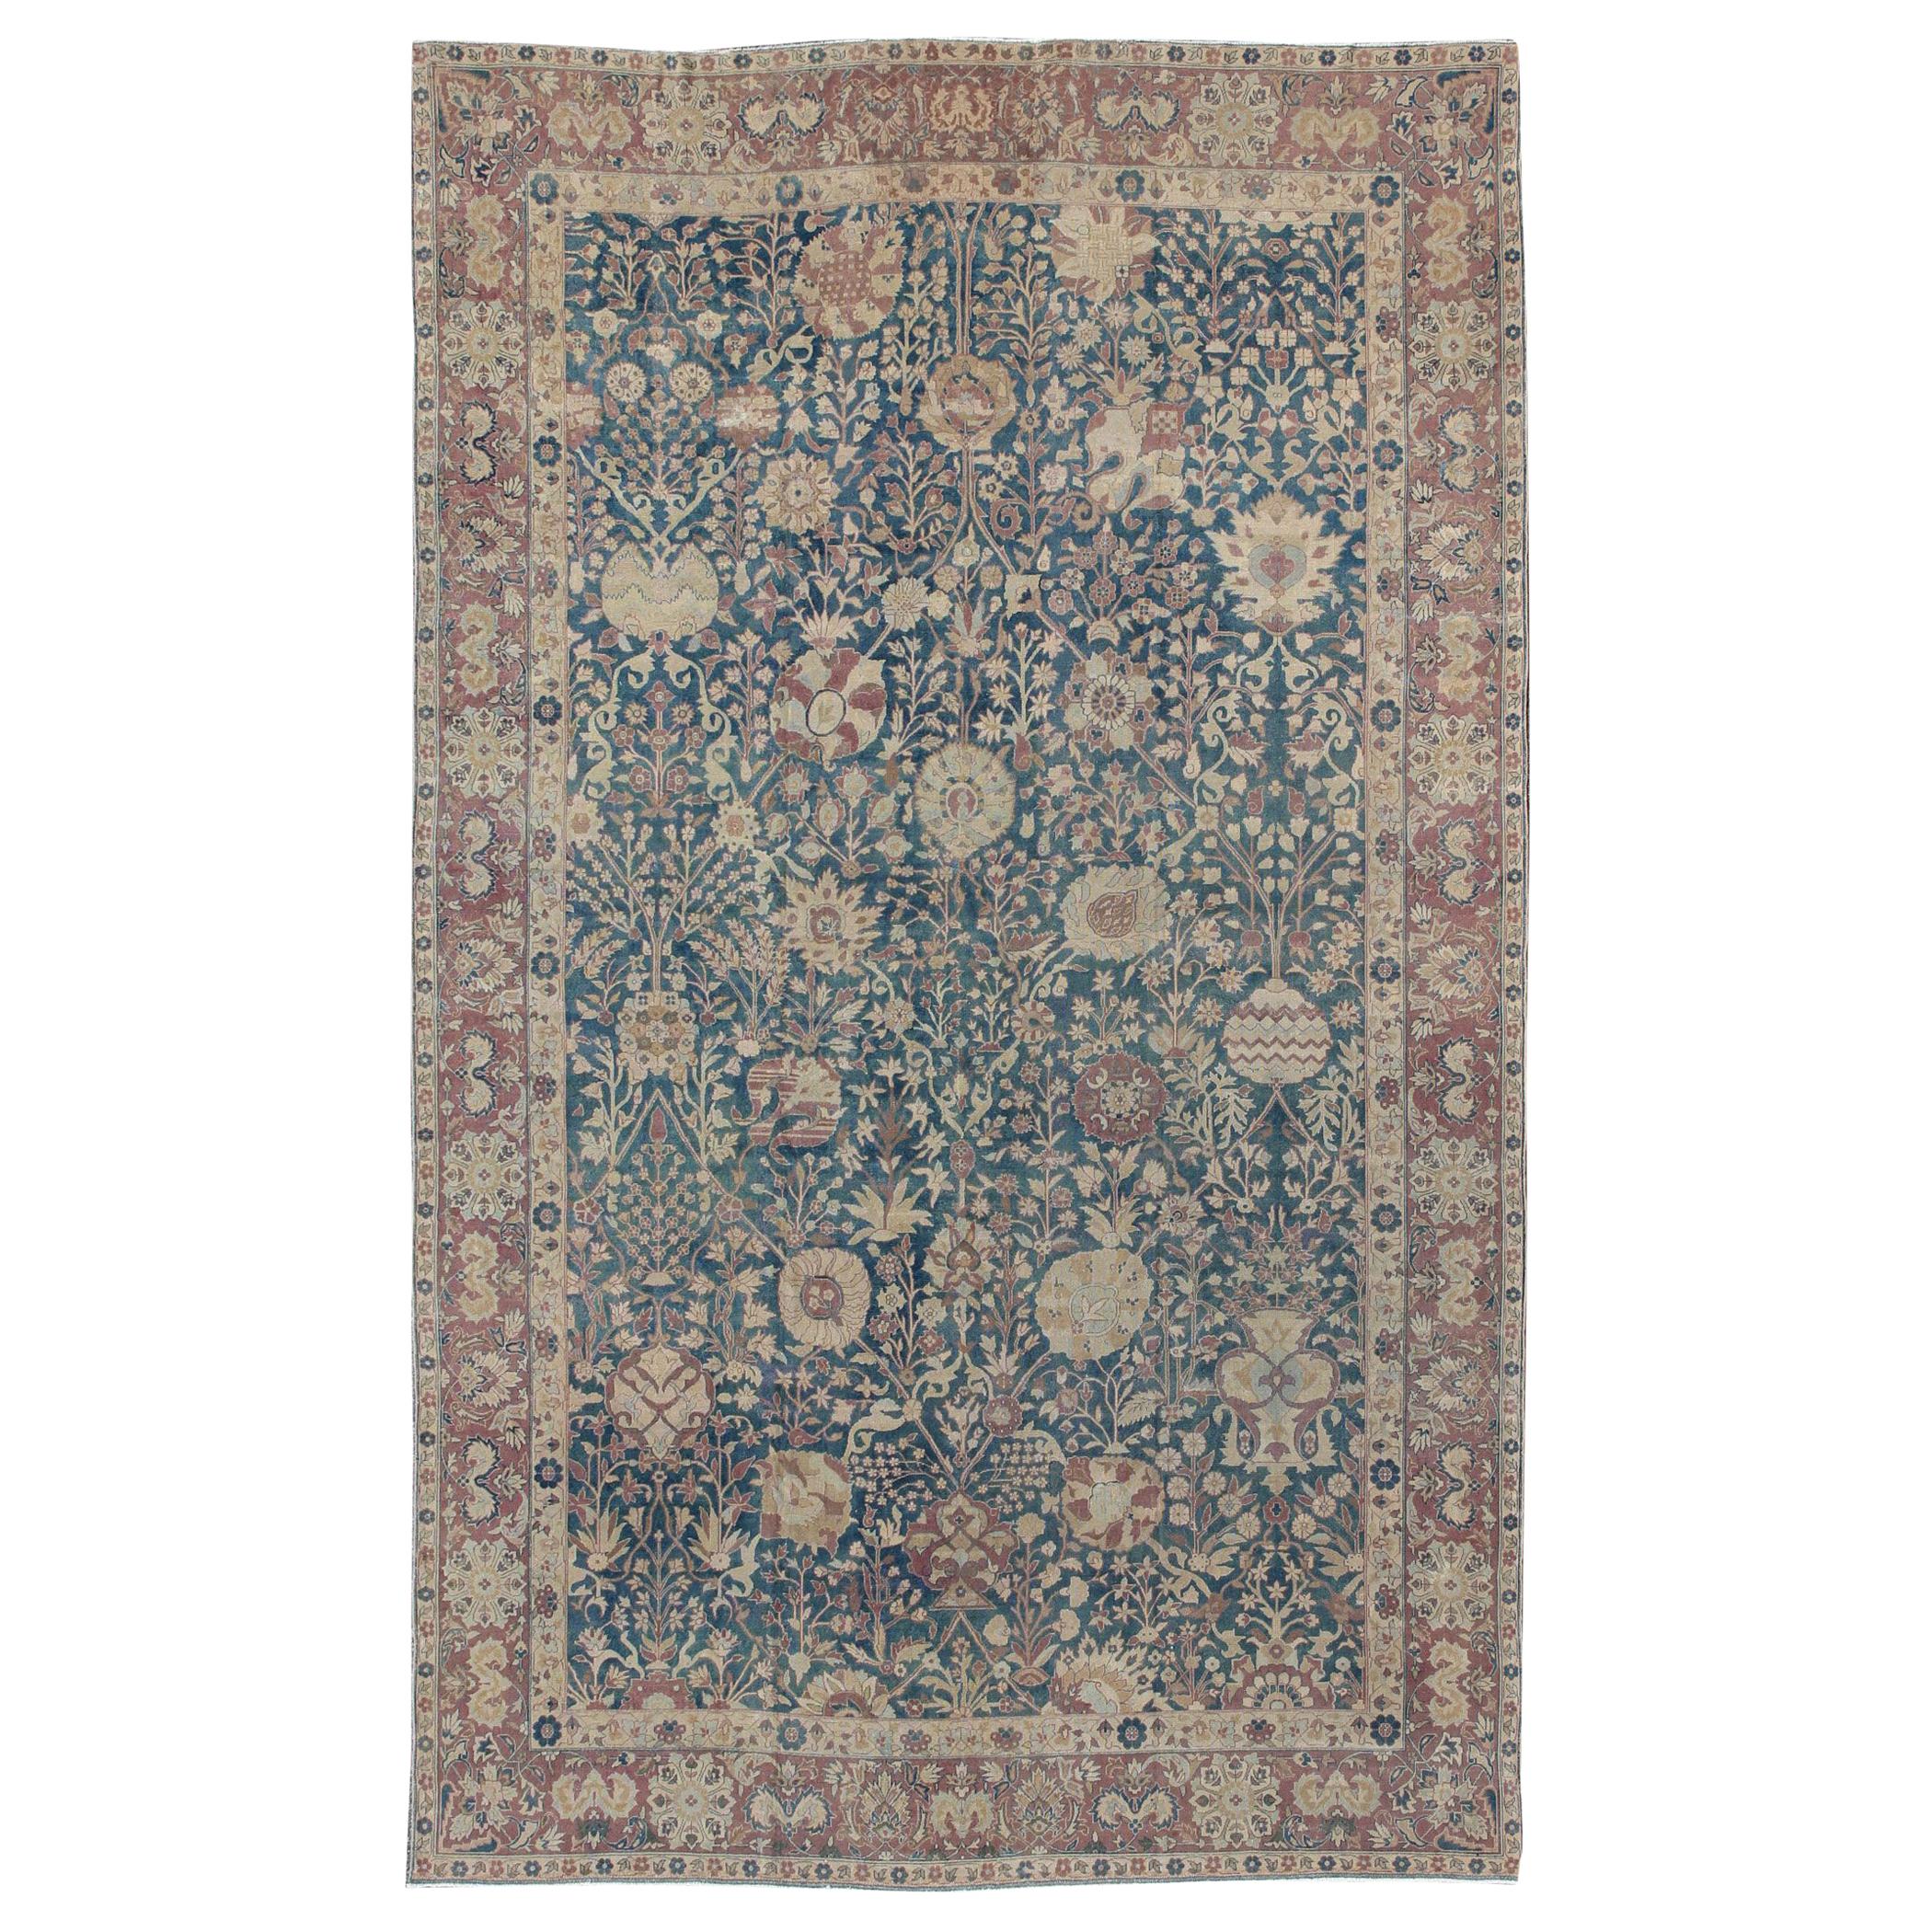 Stunning Antique Indian Agra 19th Century Vase Carpet in Teal Background For Sale